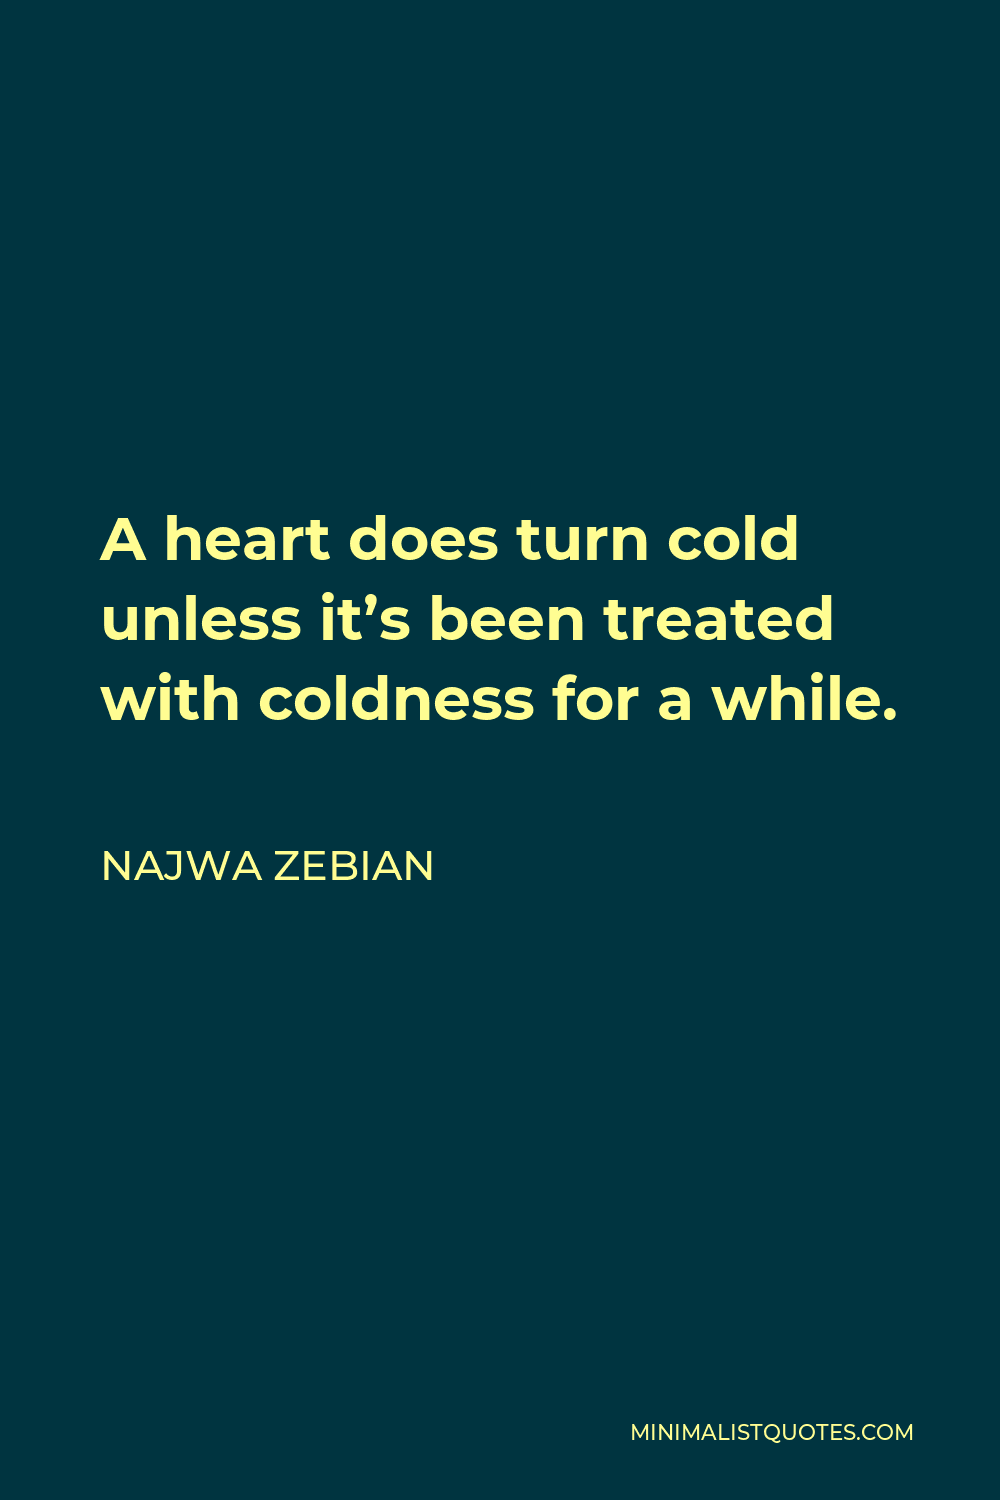 Najwa Zebian Quote - A heart does turn cold unless it’s been treated with coldness for a while.